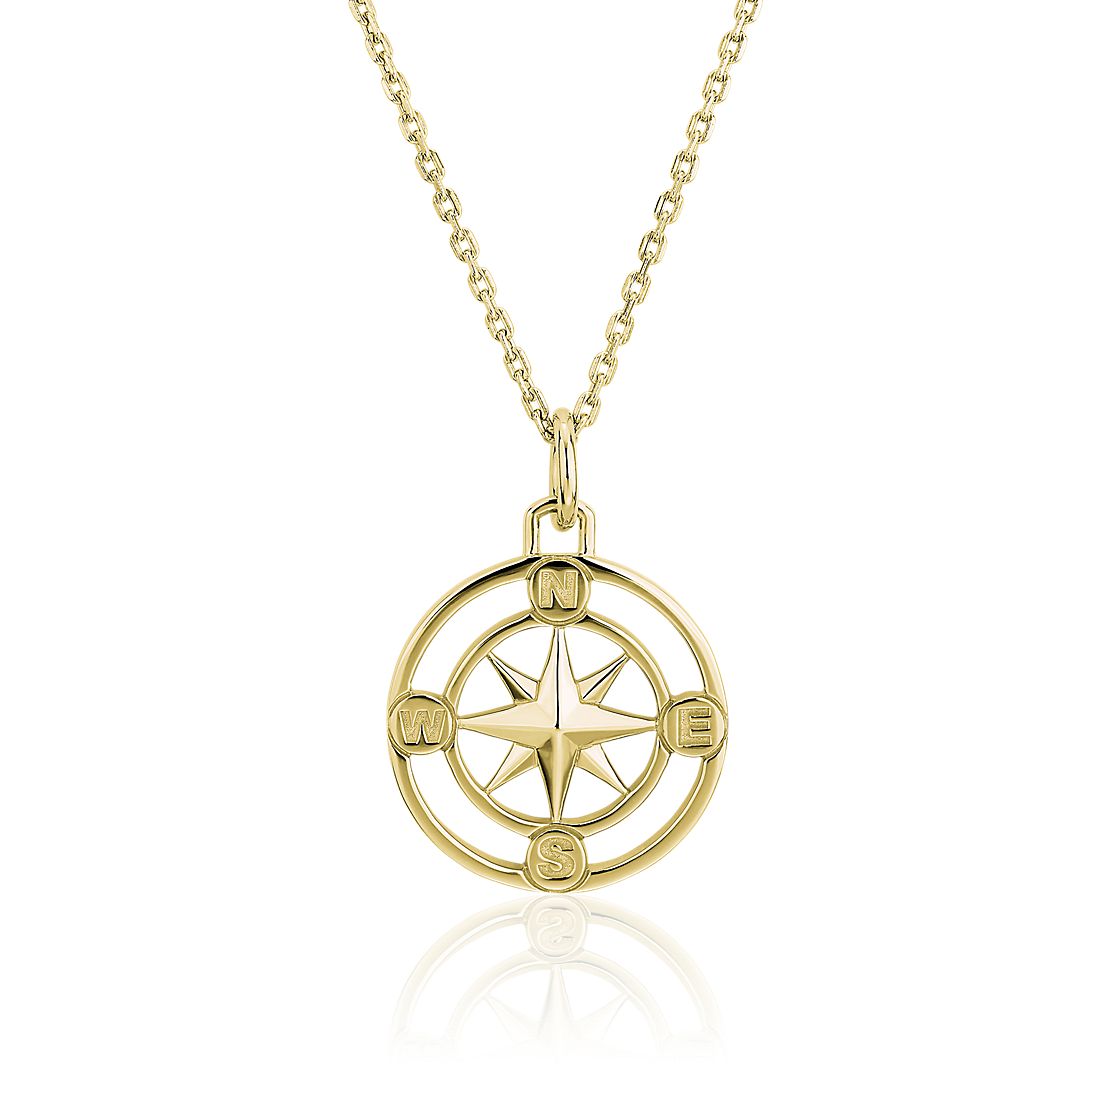 17" Petite Compass Pendant in 18k Yellow Gold